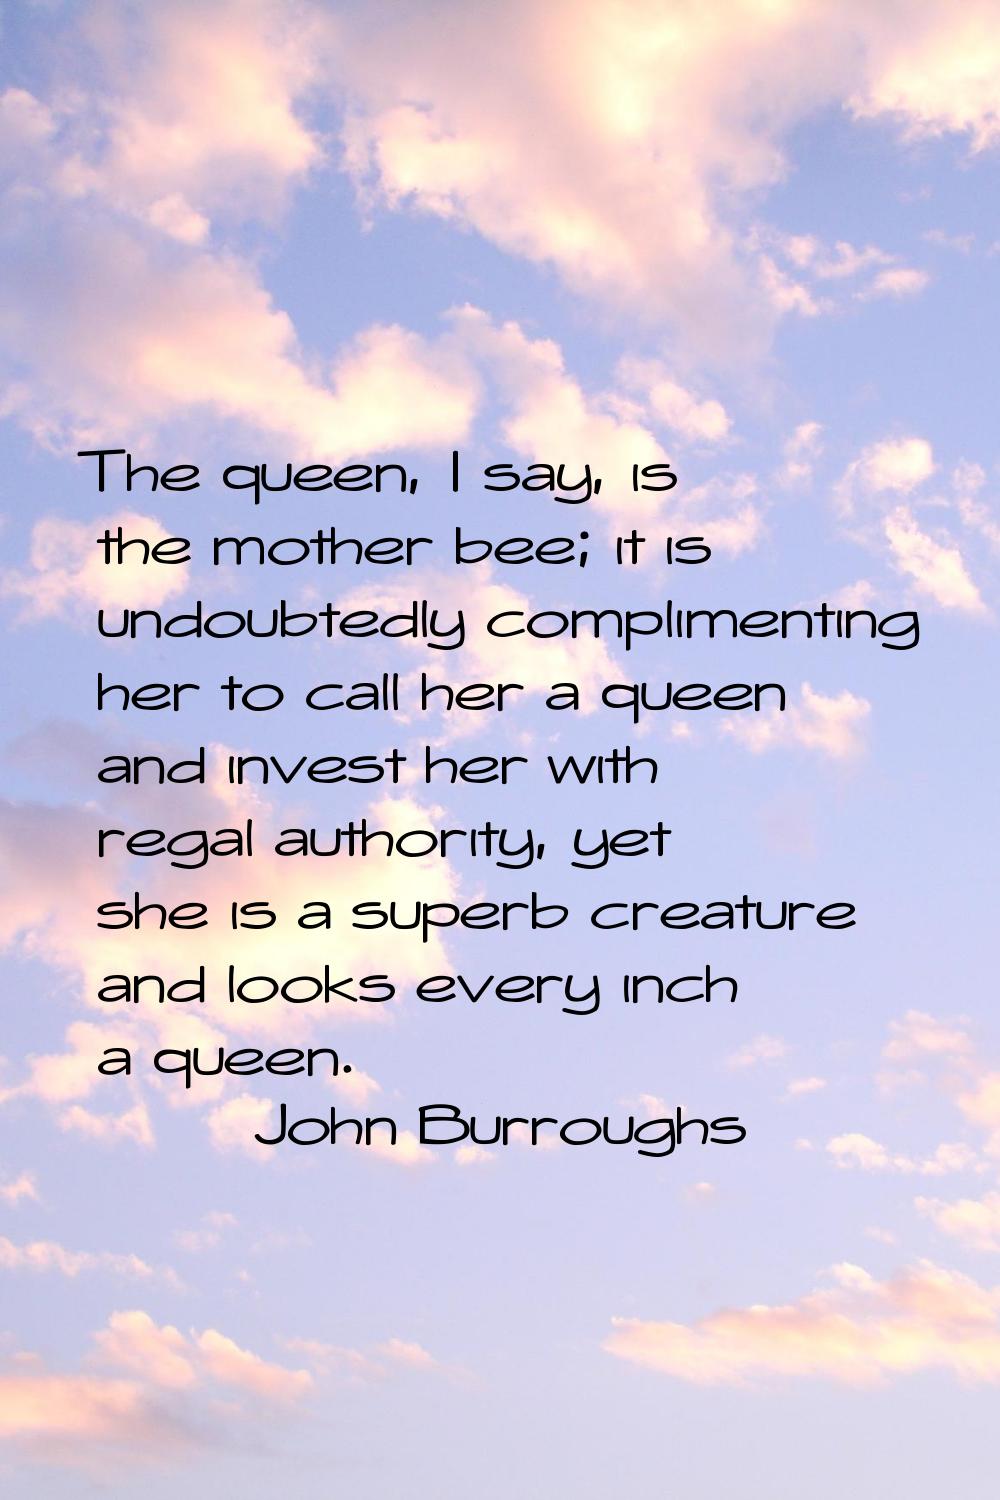 The queen, I say, is the mother bee; it is undoubtedly complimenting her to call her a queen and in